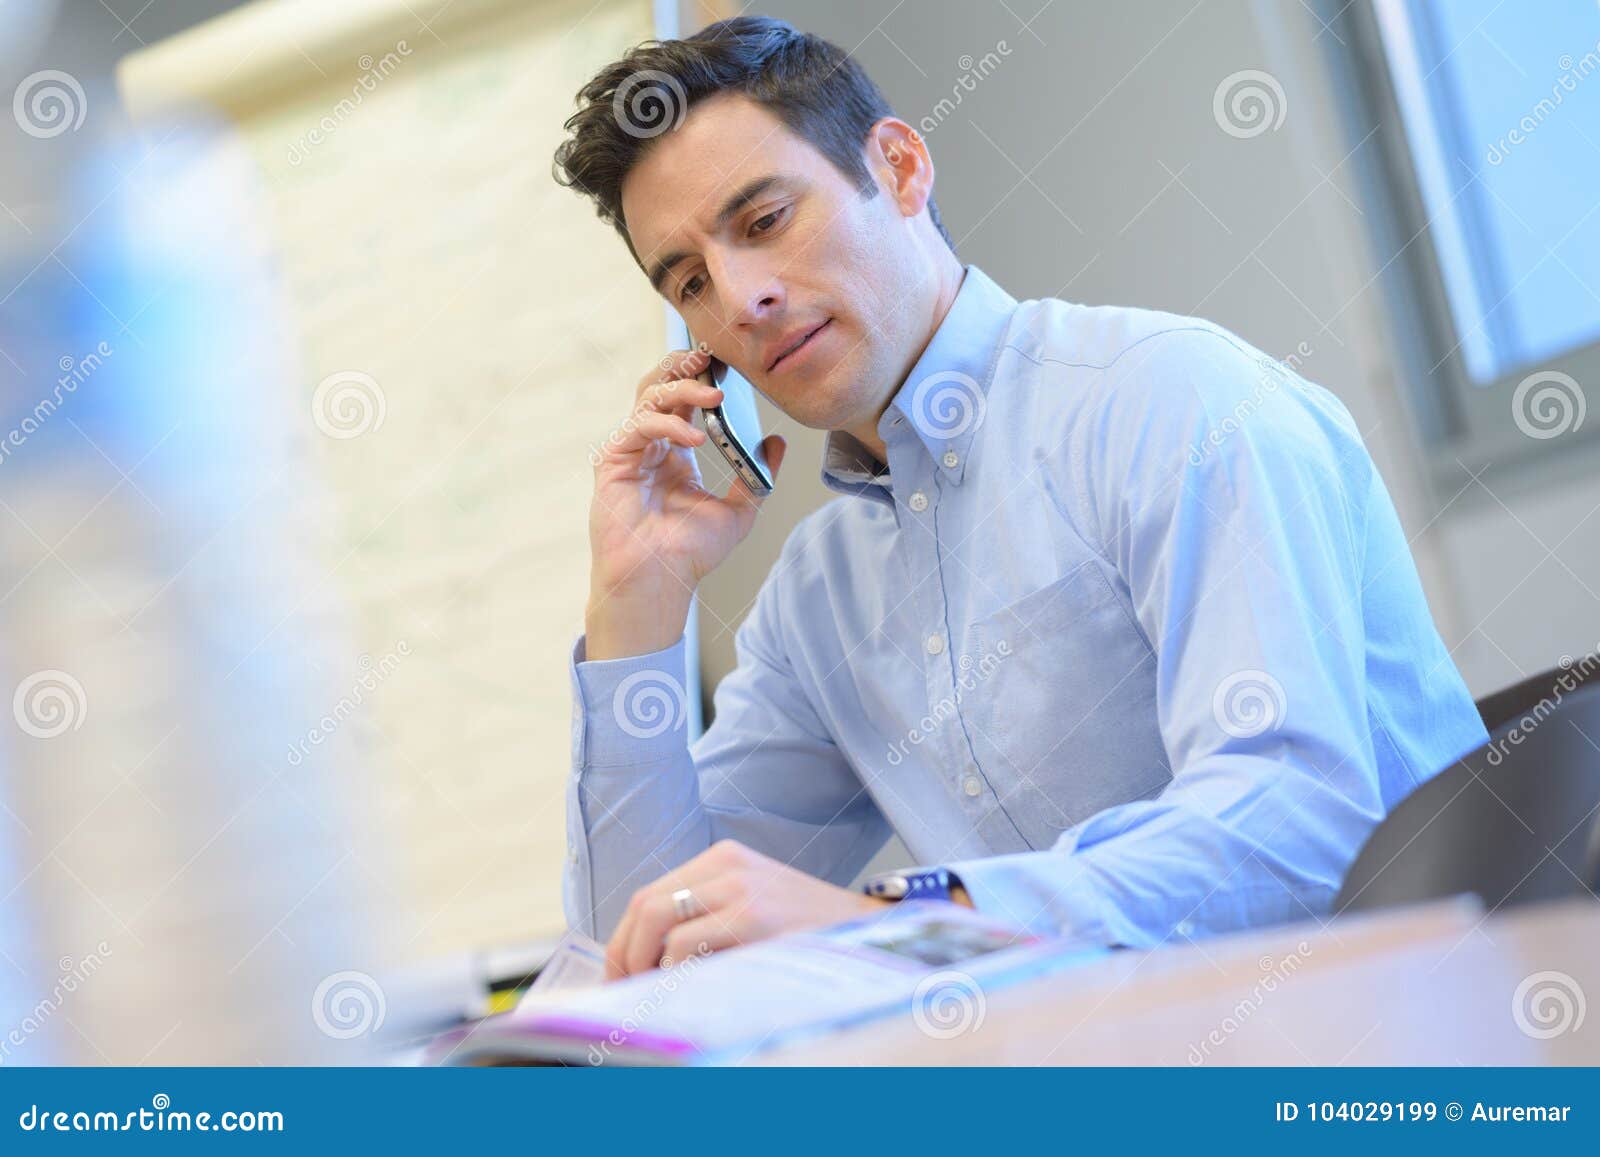 man in office with mobile phone